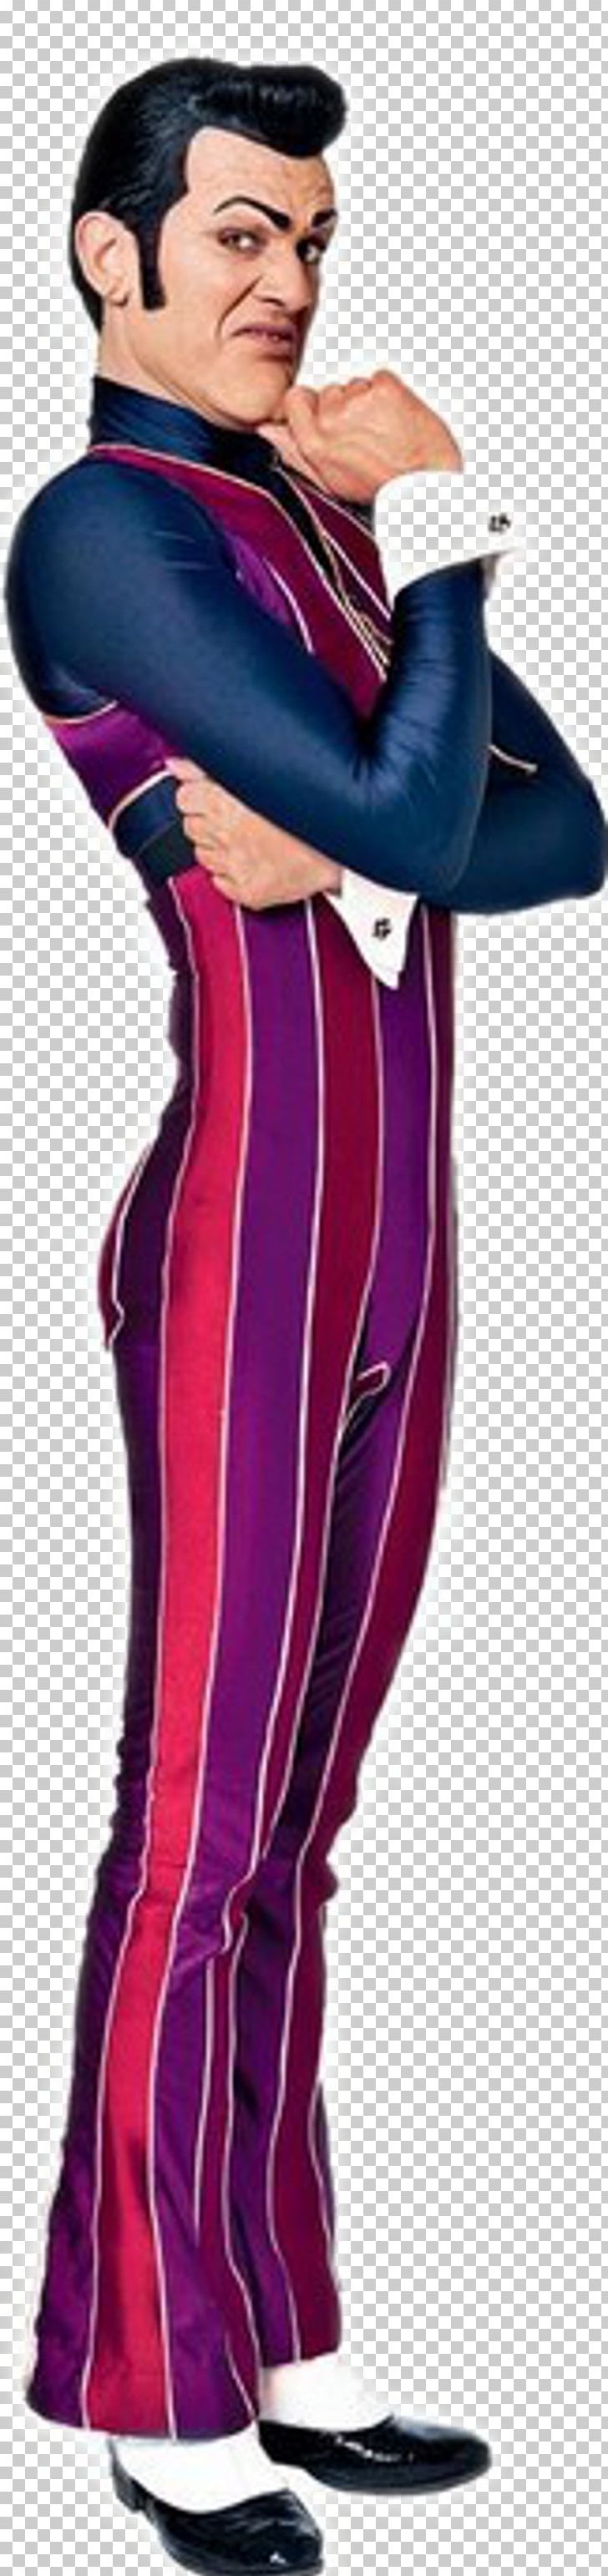 Lazytown Stephanie Sportacus Robbie Rotten Character Png Clipart The Best Porn Website 3388